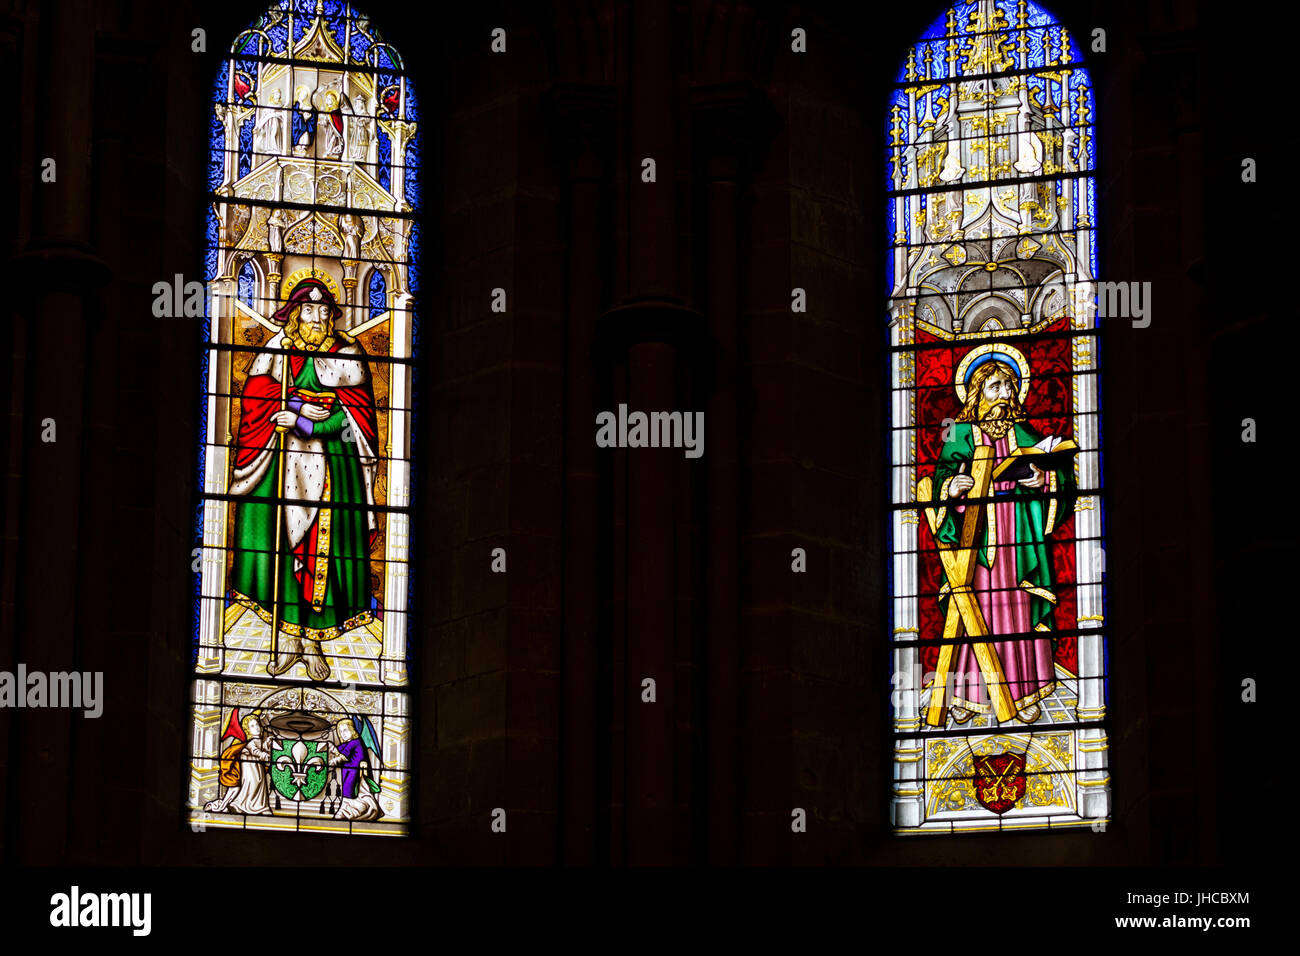 Saint James and Saint Andrew - St. Peter's Cathedral - Geneva Stock Photo